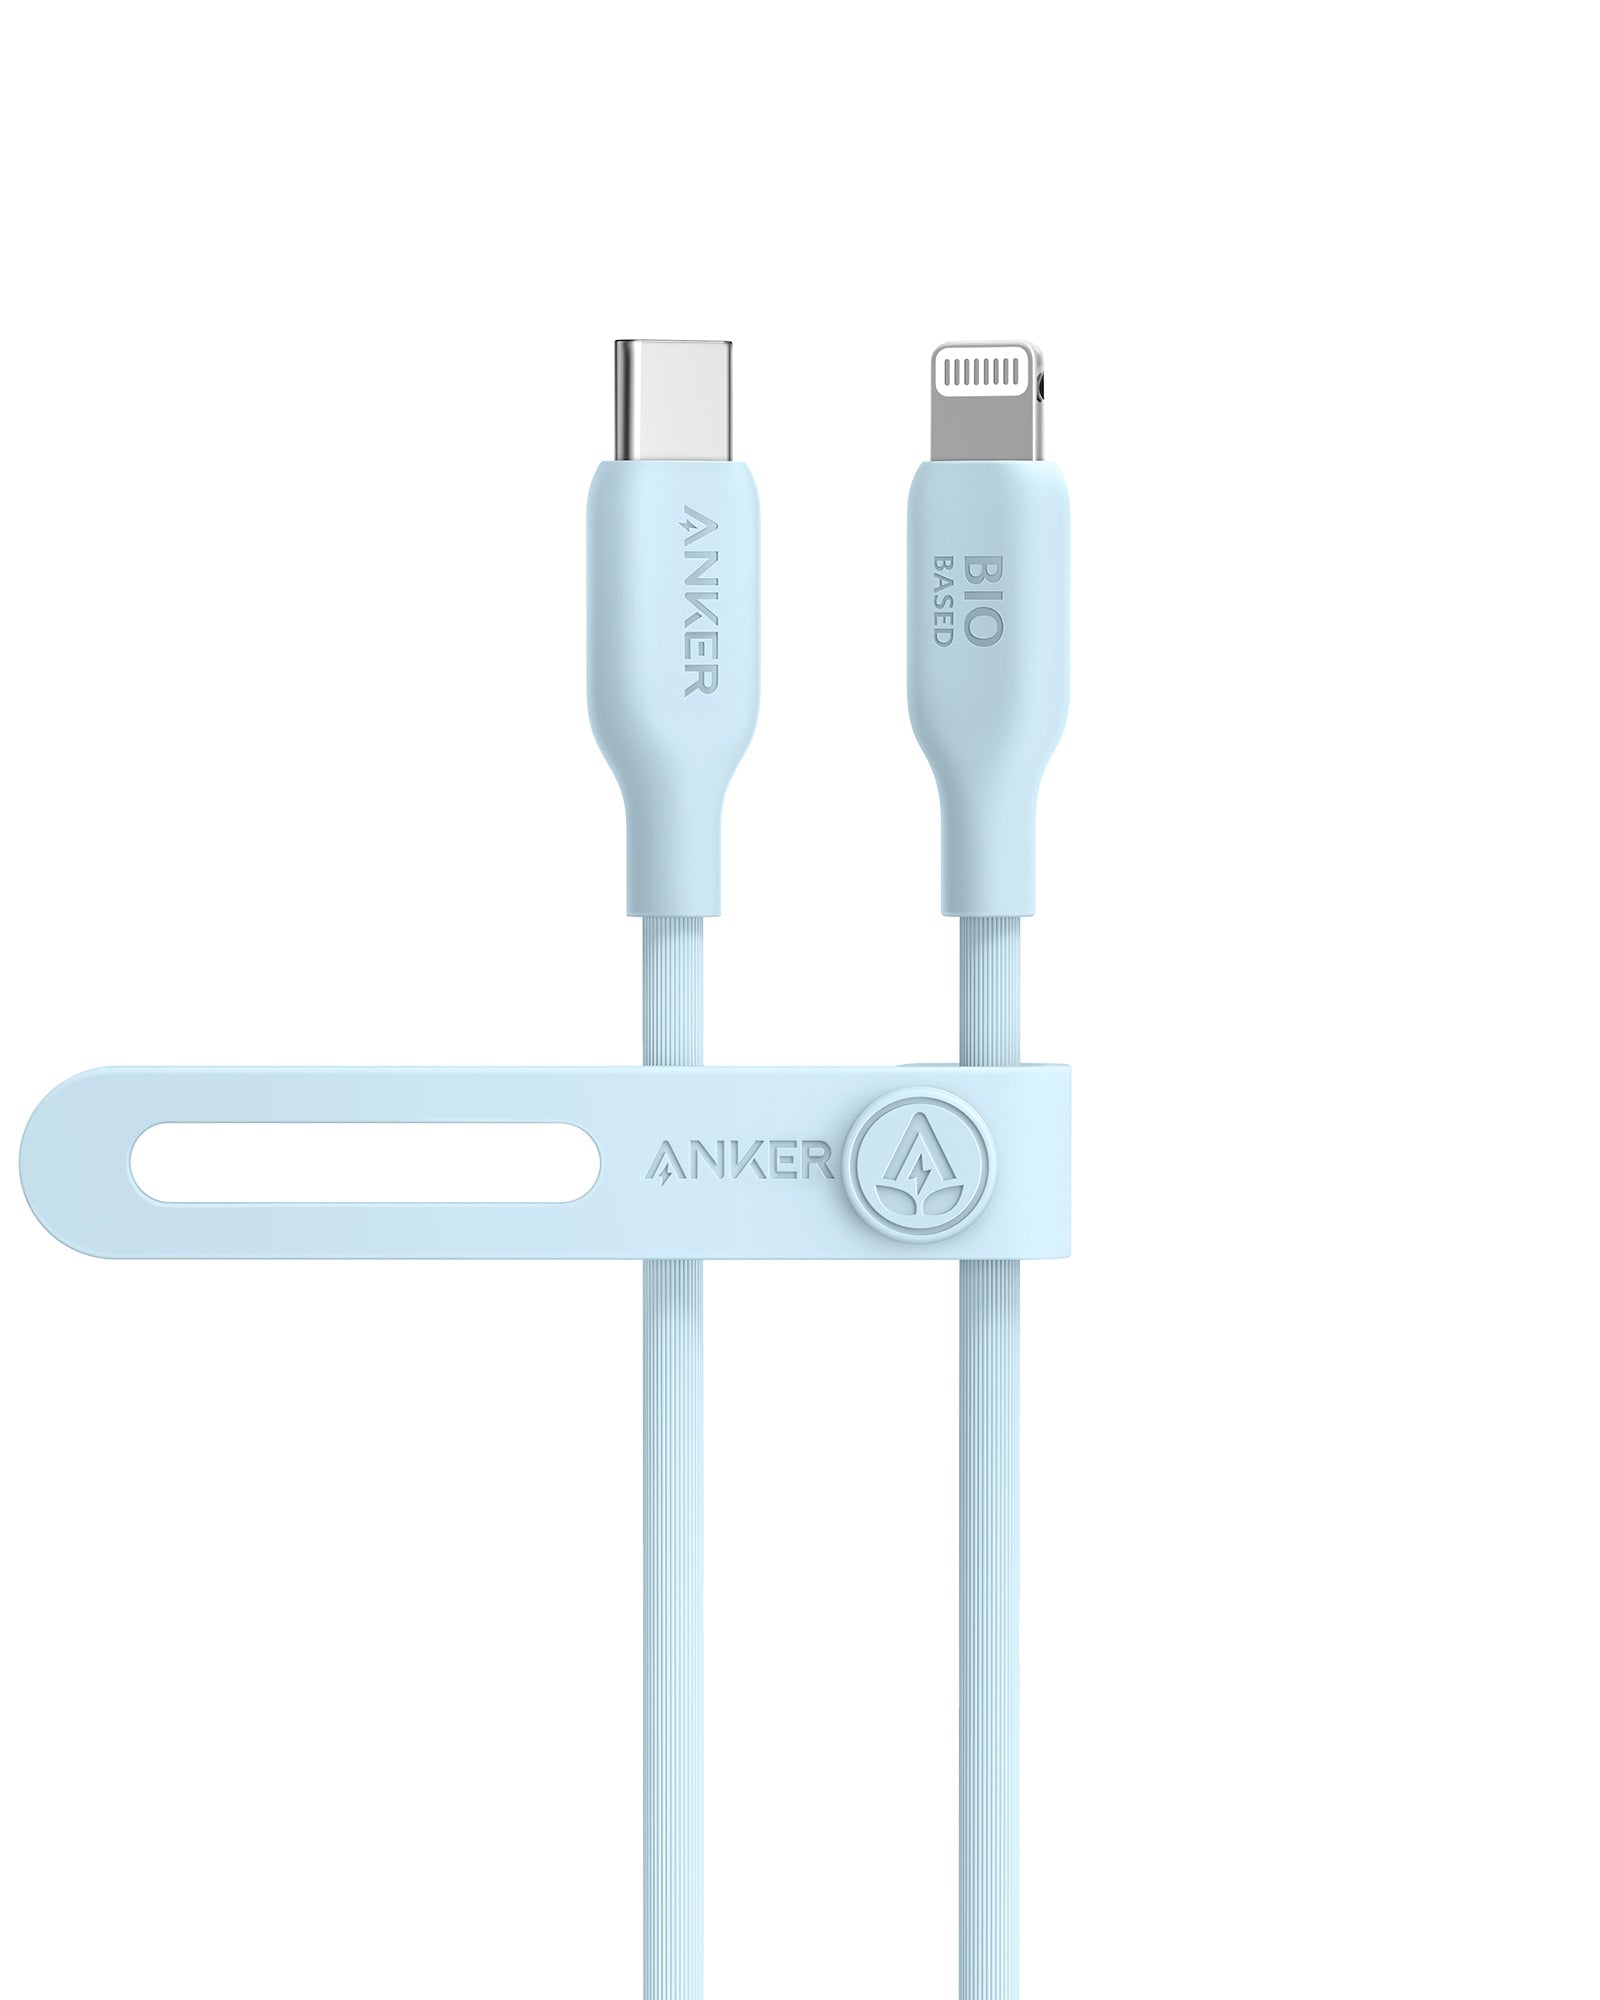 Photos - Cable (video, audio, USB) ANKER 541 USB-C to Lightning Cable  3ft / Misty Blue A80A1031 (Bio-Based)